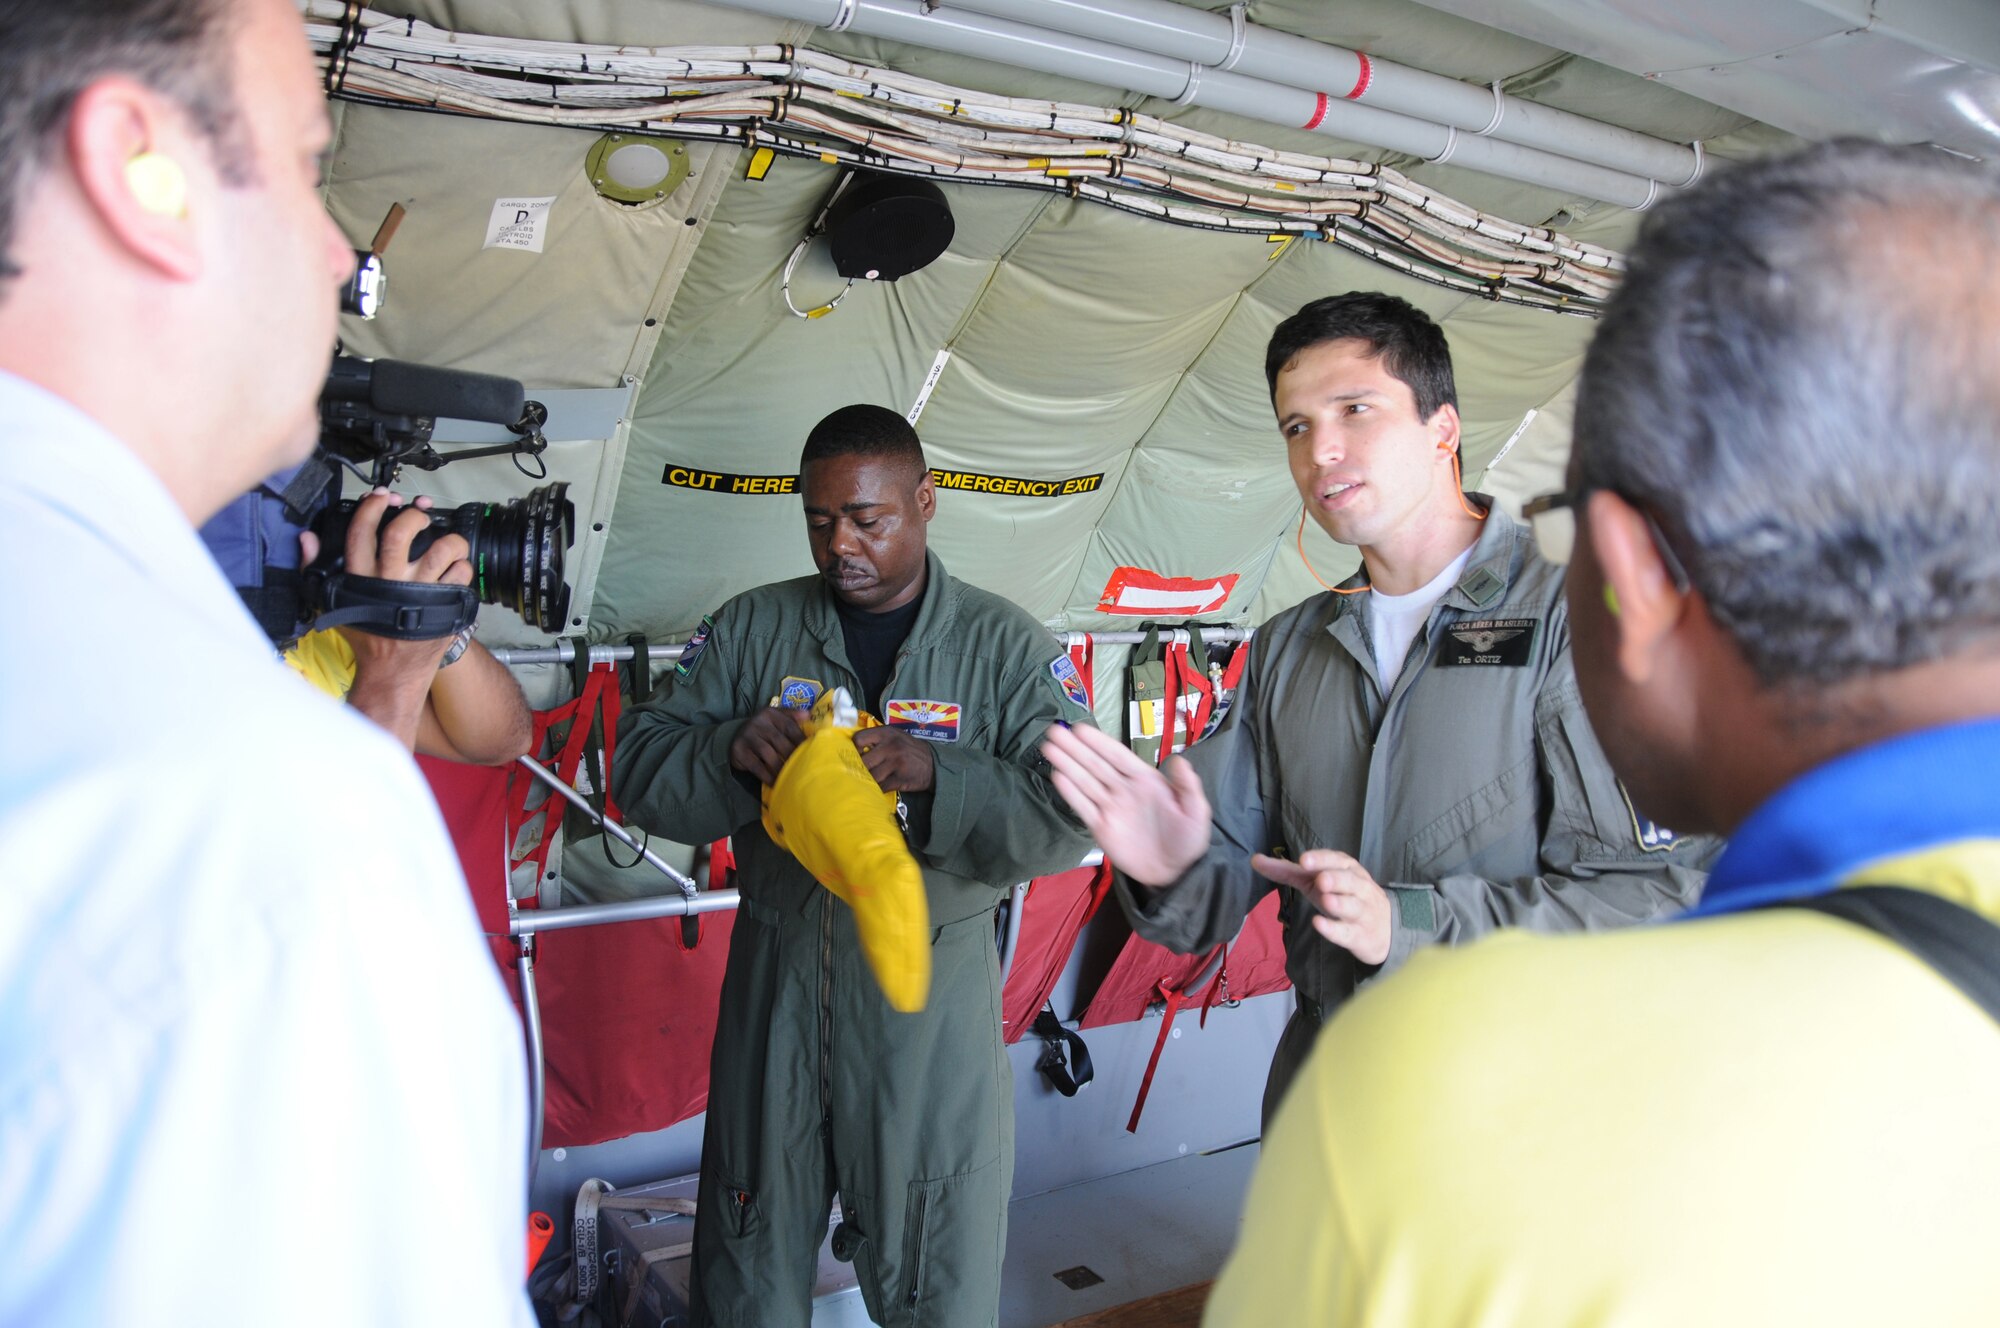 RECIFE, Brazil ? Master Sgt Vince Jones,  a boom operator for the 161st Air Refueling Wing, Phoenix Ariz., and LT Ortiz, a pilot for the Brazilian Air Force, give a safety briefing to a local media crew before a refueling mission on November 9, 2010. The 161st ARW is participating in CRUZEX V, or Cruzeiro Do Sul (Southern Cross).  CRUZEX  is a multi-national combined exercise involving the Air Forces of Argentina, Brazil, Chile, France and Uruguay, and observers from numerous other countries with more than 82 aircraft and almost 3,000 Airmen involved. U.S. Air Force Photo by Master Sgt. Kelly M. Deitloff